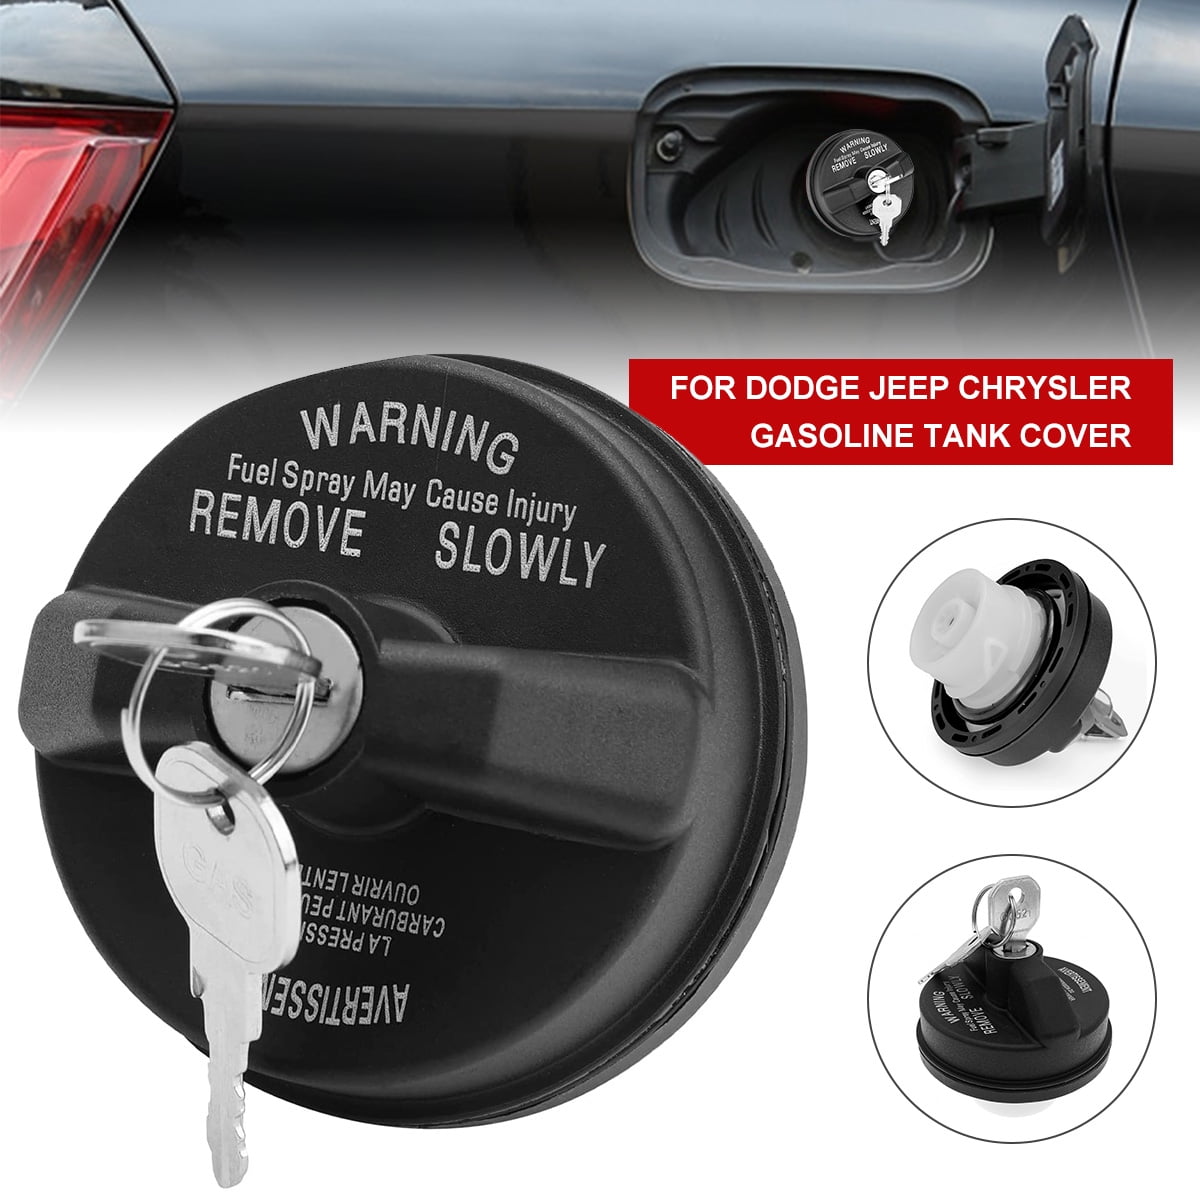 Locking Gas Cap for Dodge Journey 2009-2018, Lock Fuel Cap for Jeep Wrangler,  Locking Gas Replacement for Chrysler, Fuel Tank Gas Cap with 2 Keys  05278655AB & 5278655AB 